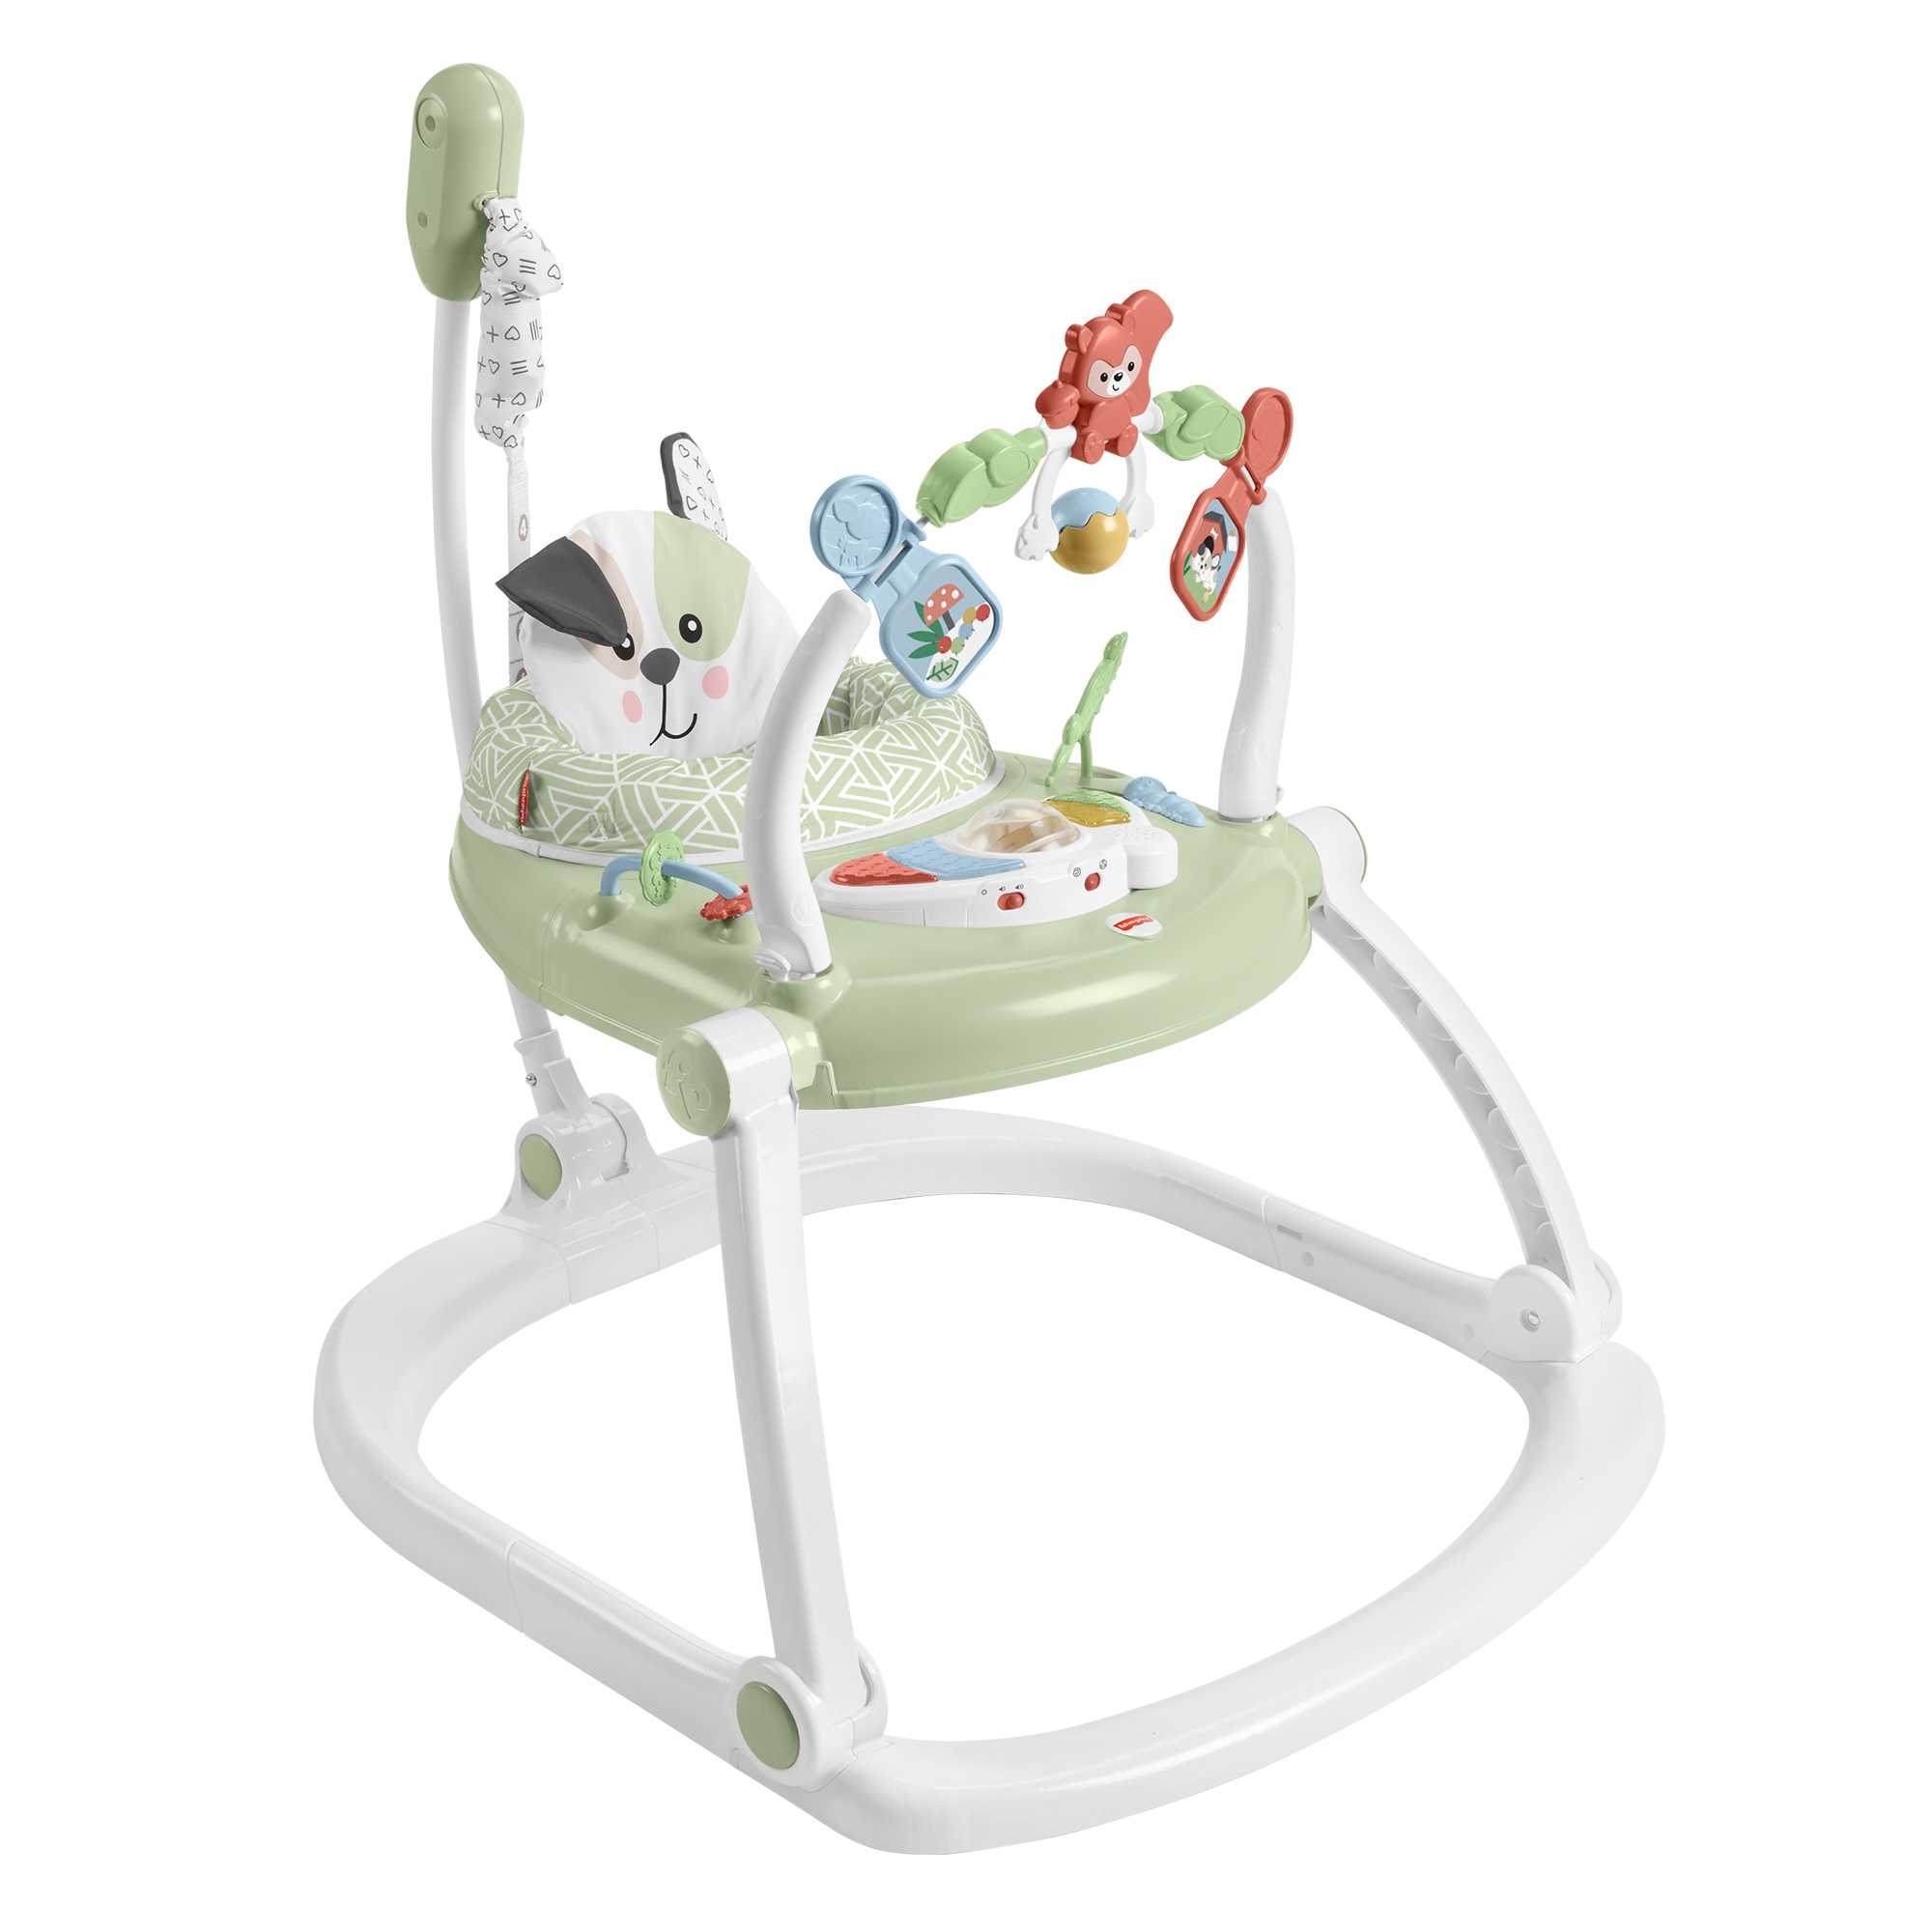 Fisher Price Jumperoo Activity Center, Animal Activity